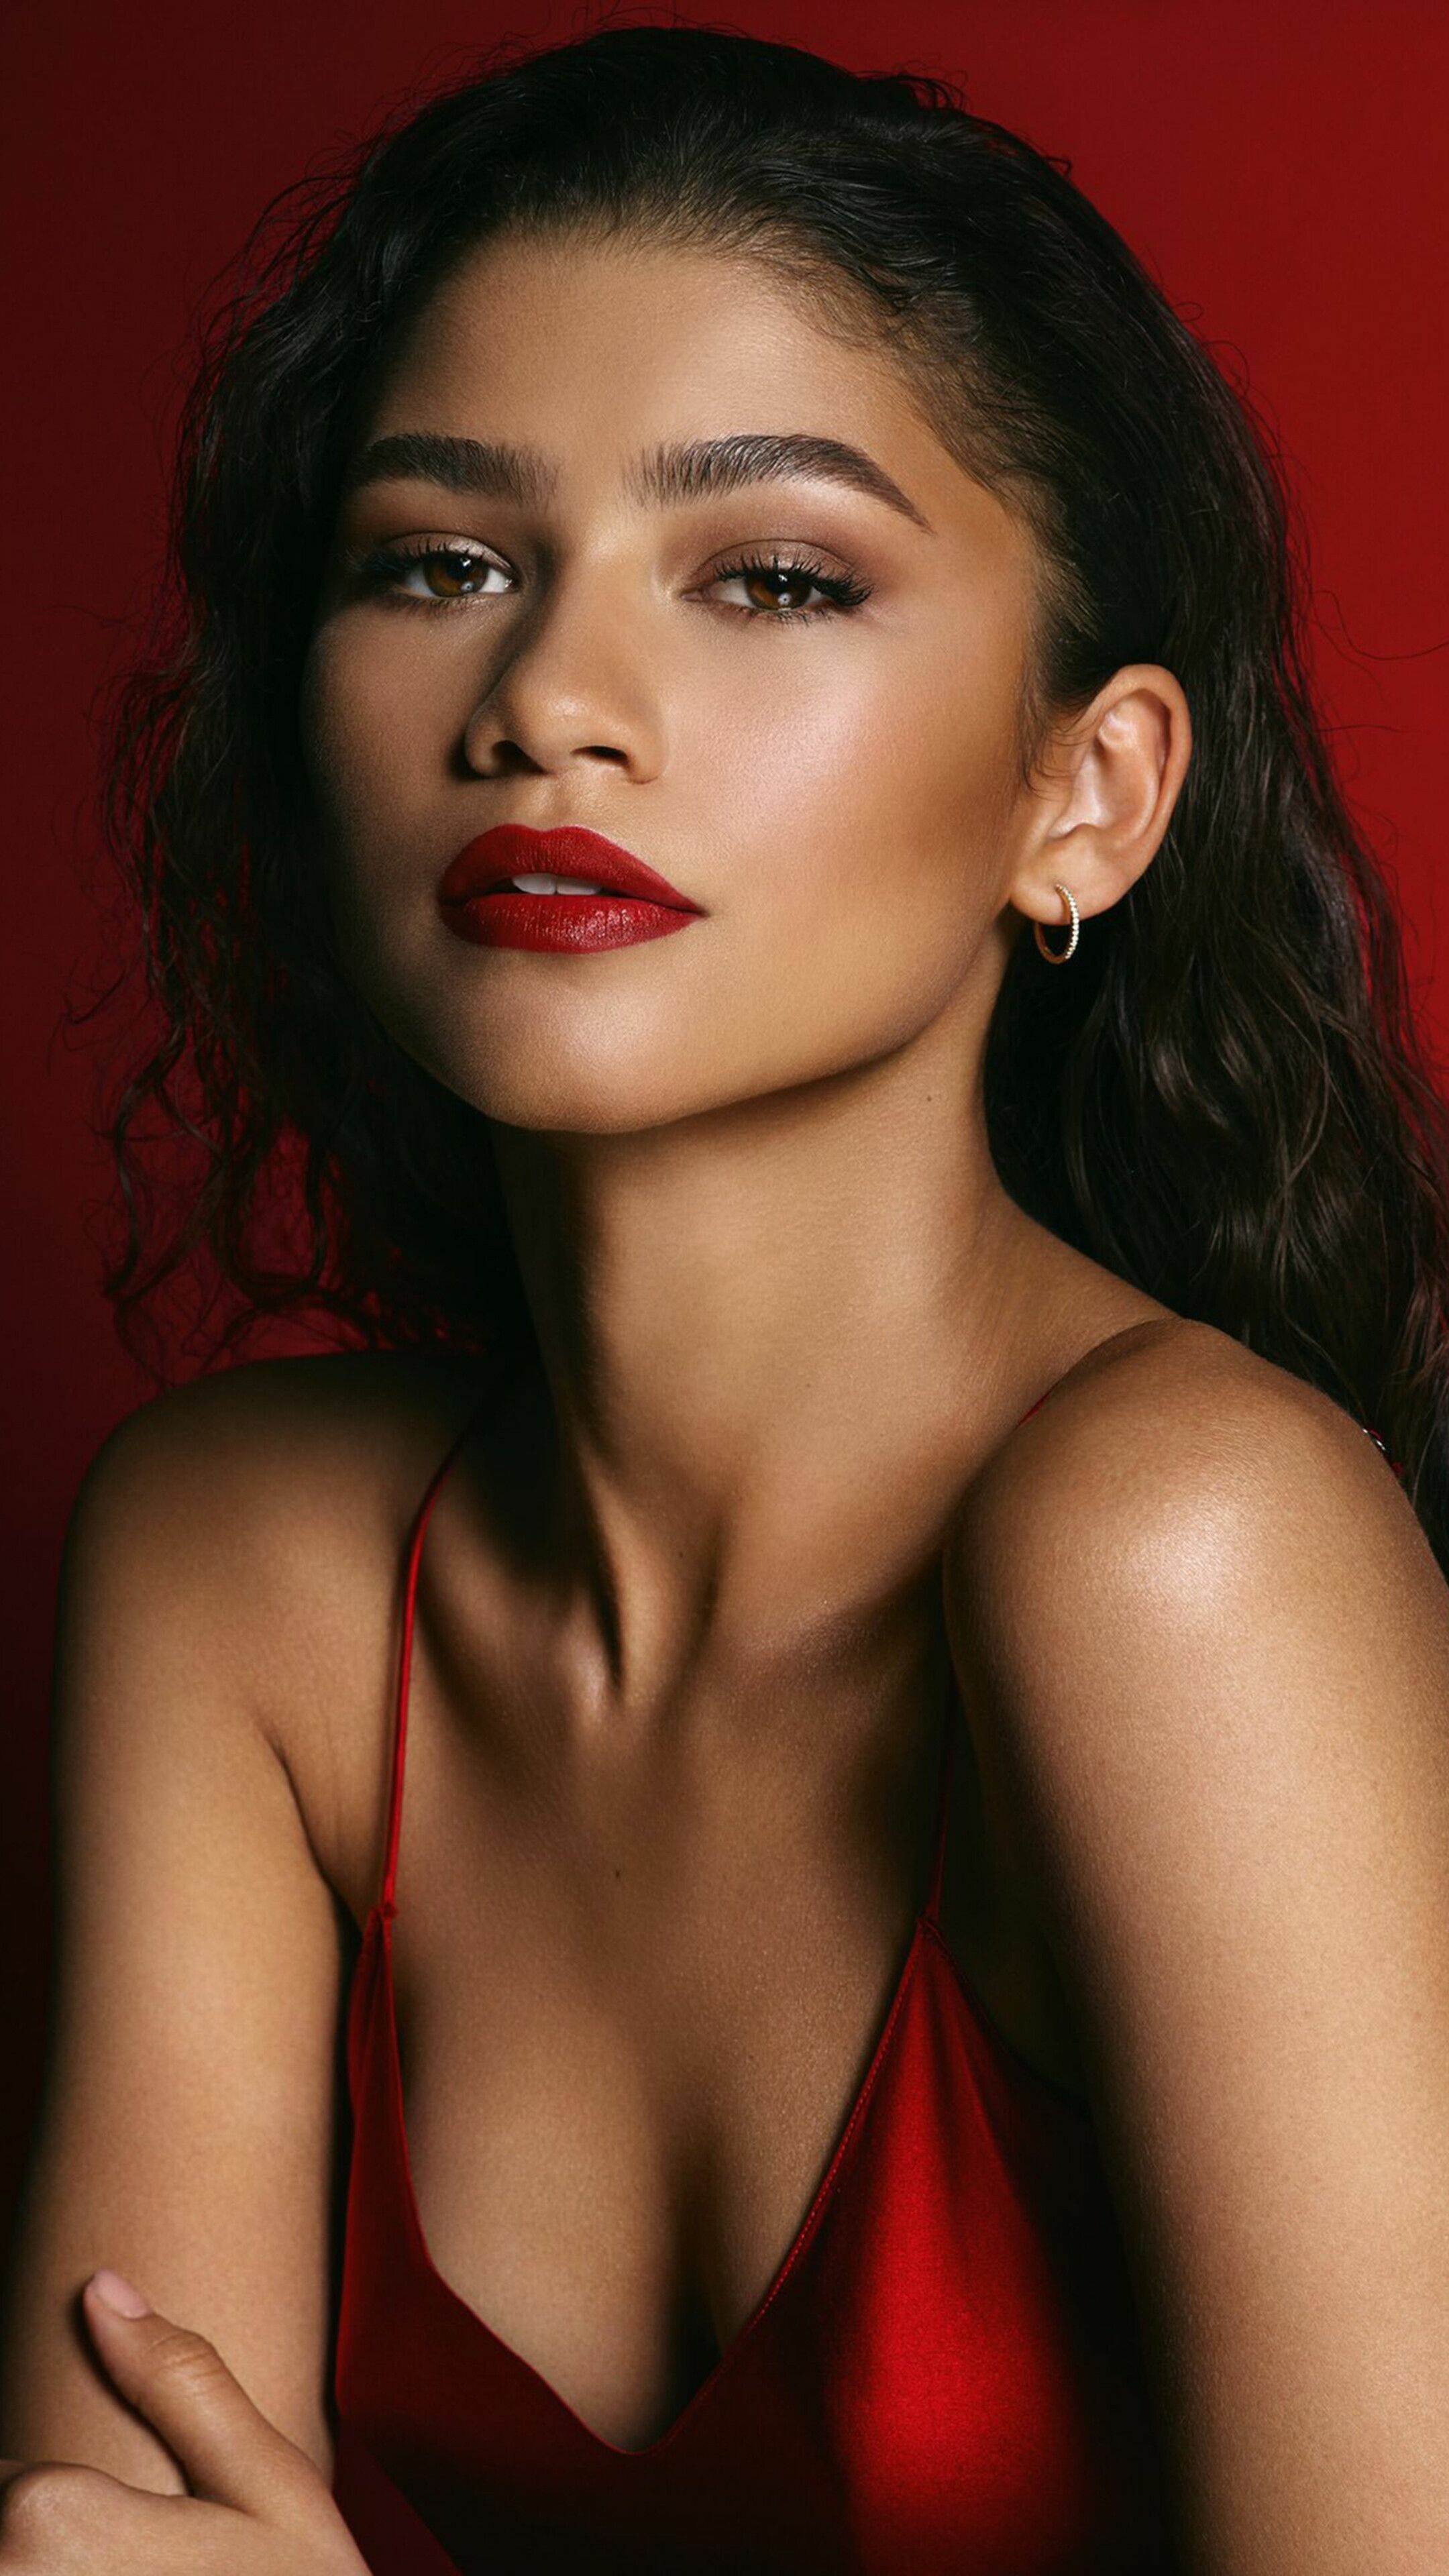 Zendaya: Began her career appearing as a child model working for Macy's, Mervyns and Old Navy. 2160x3840 4K Wallpaper.